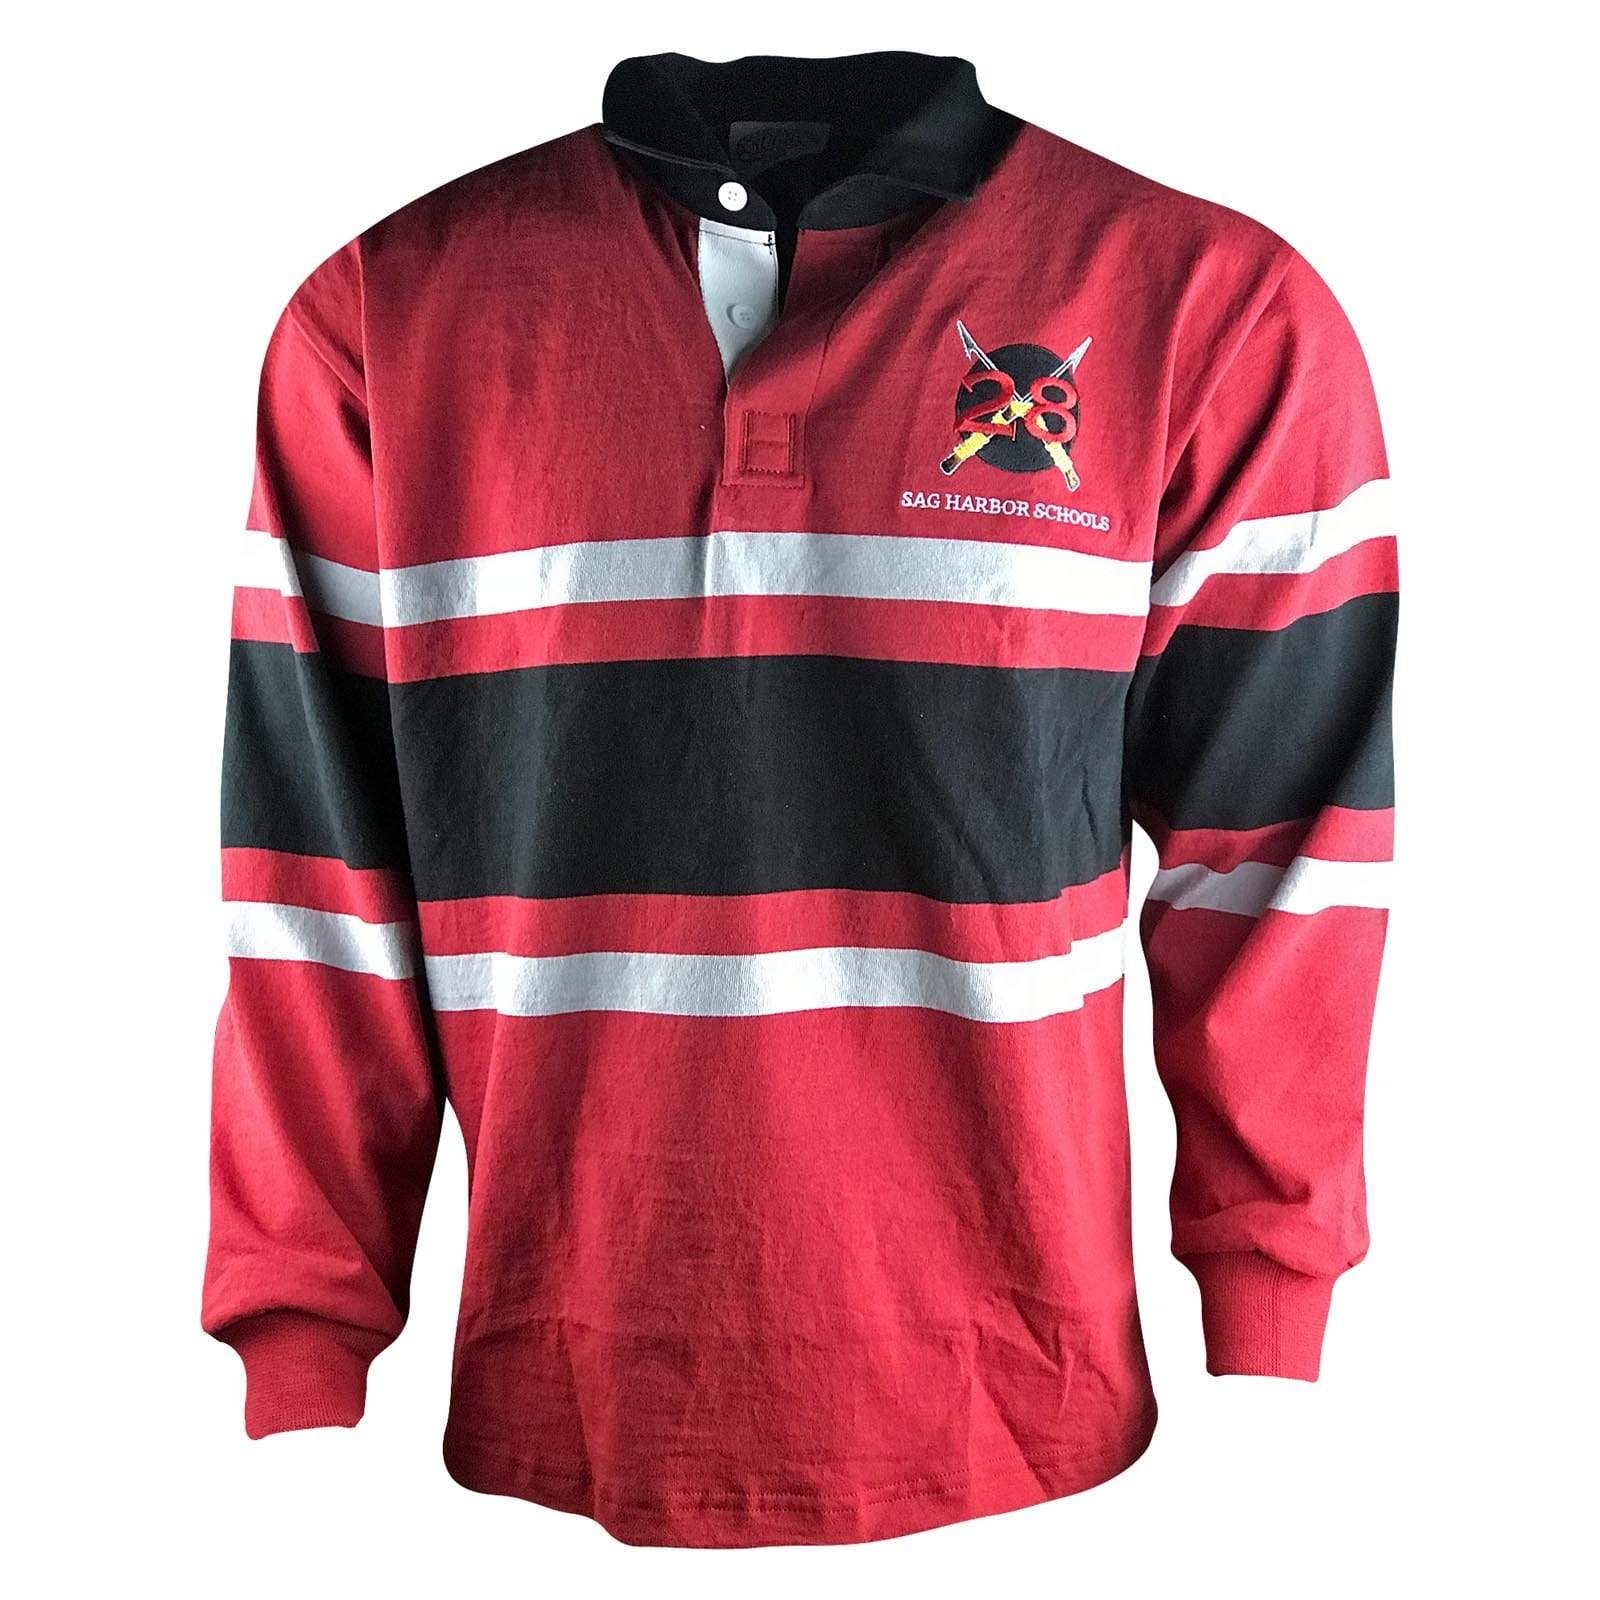 Get latest Women's Custom Classic Cotton Rugby Jersey at best